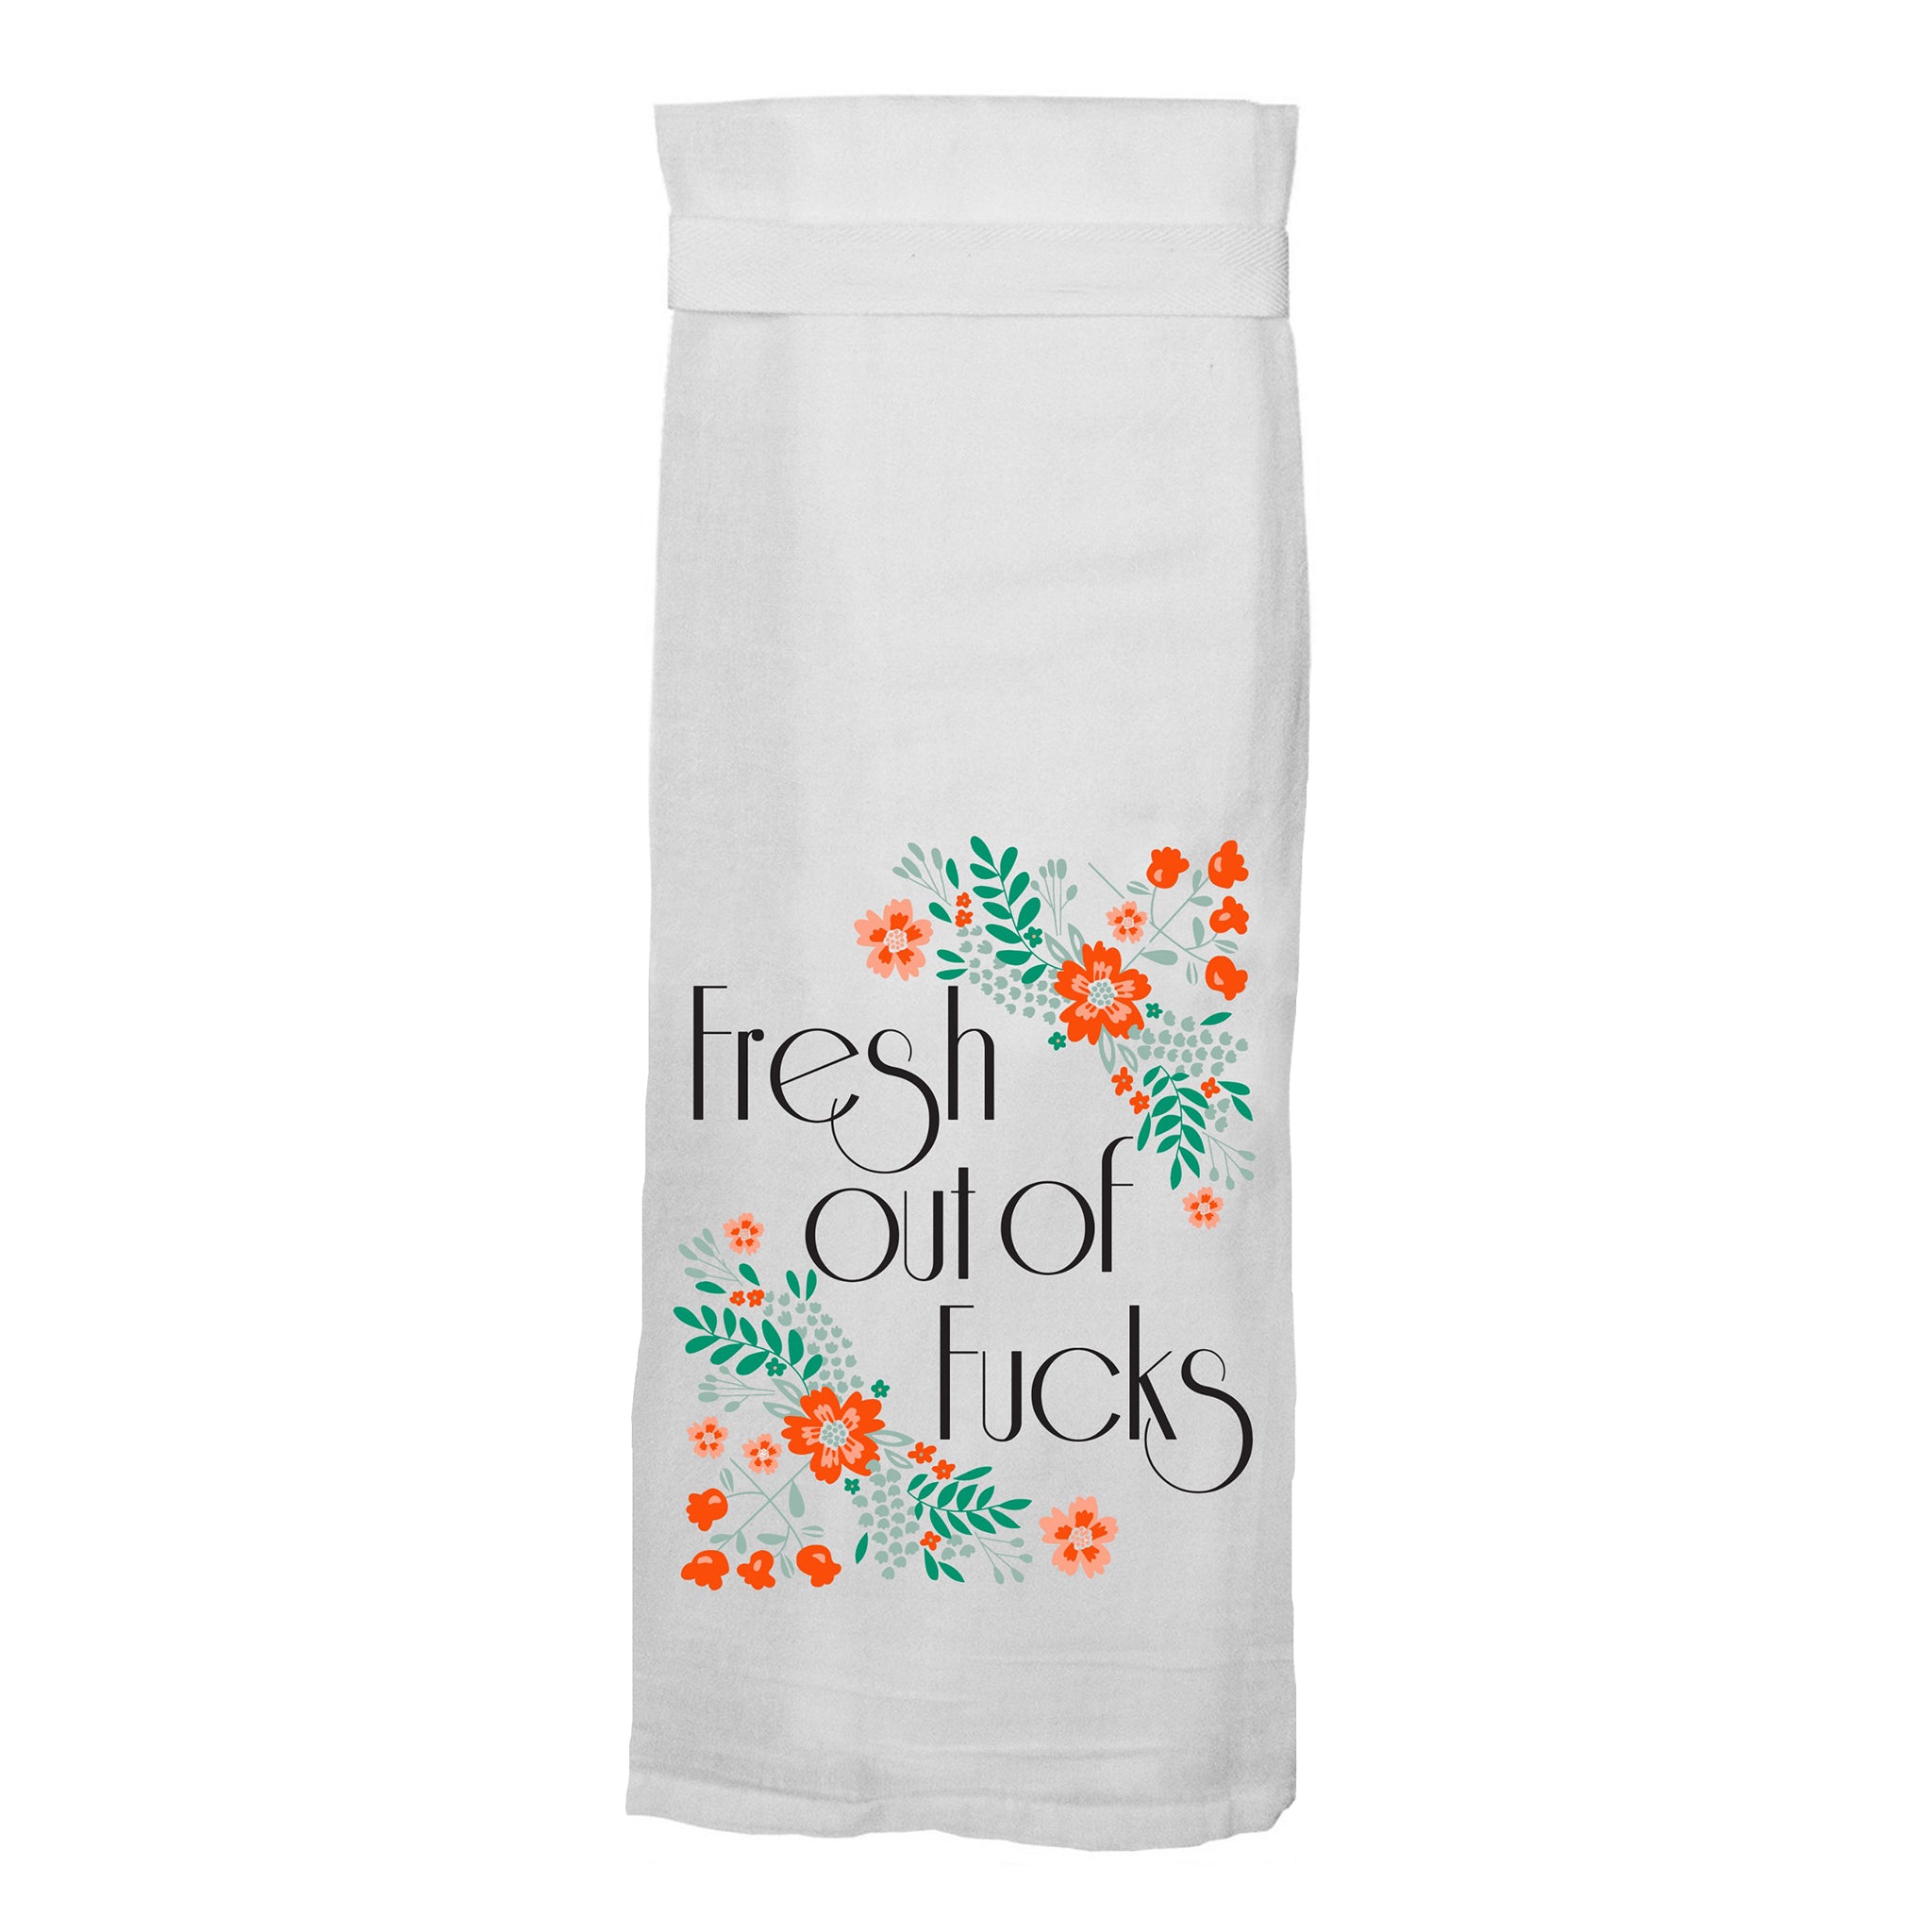 Fresh Out Of Fucks Flour Sack Hang Tight Towel - Twisted Wares®